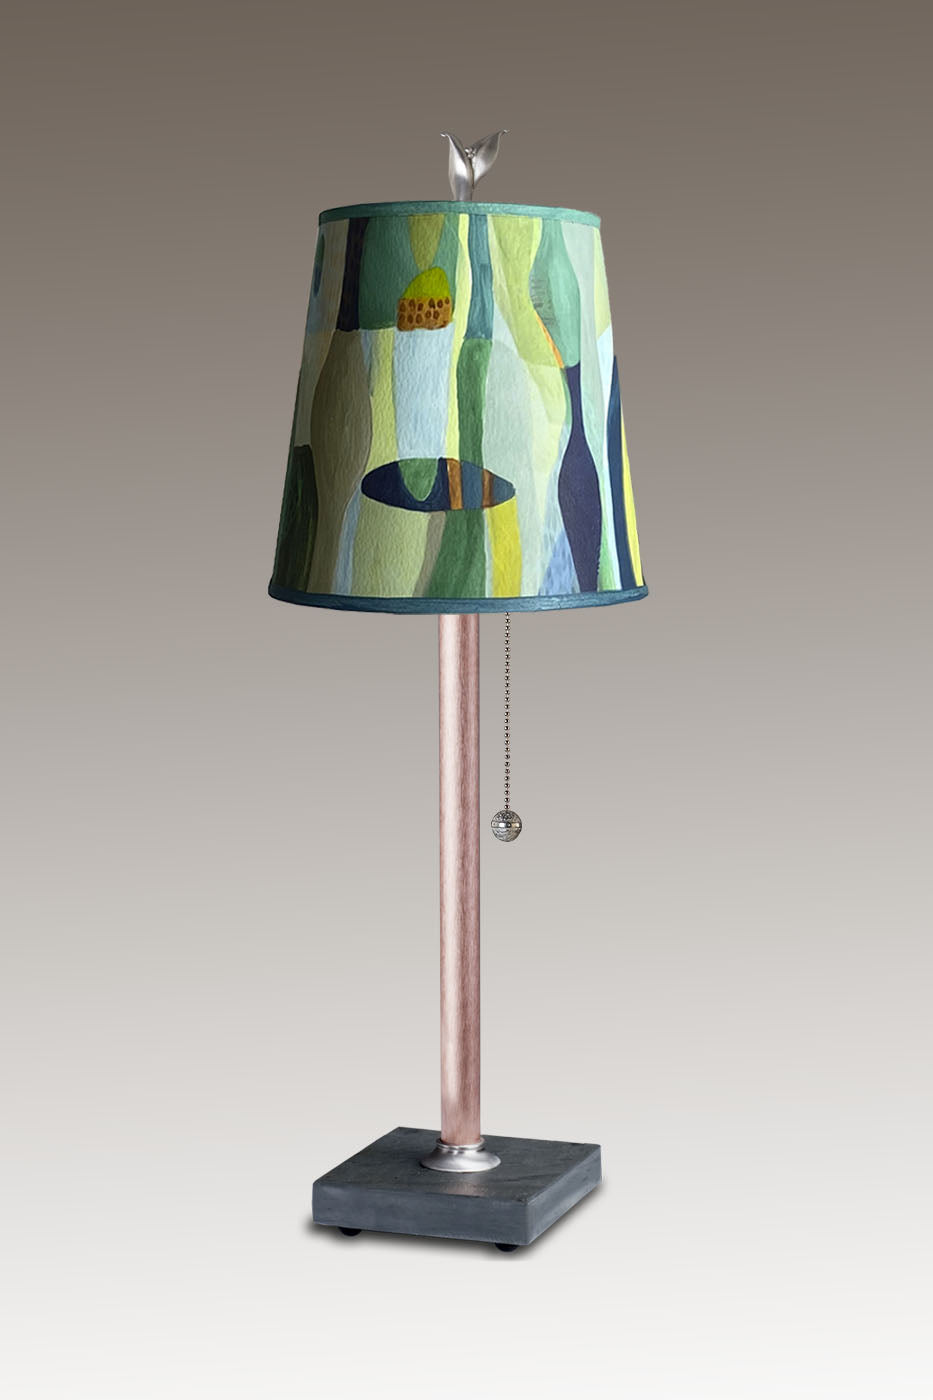 Copper Table Lamp with Small Drum Shade in Riviera in Citrus